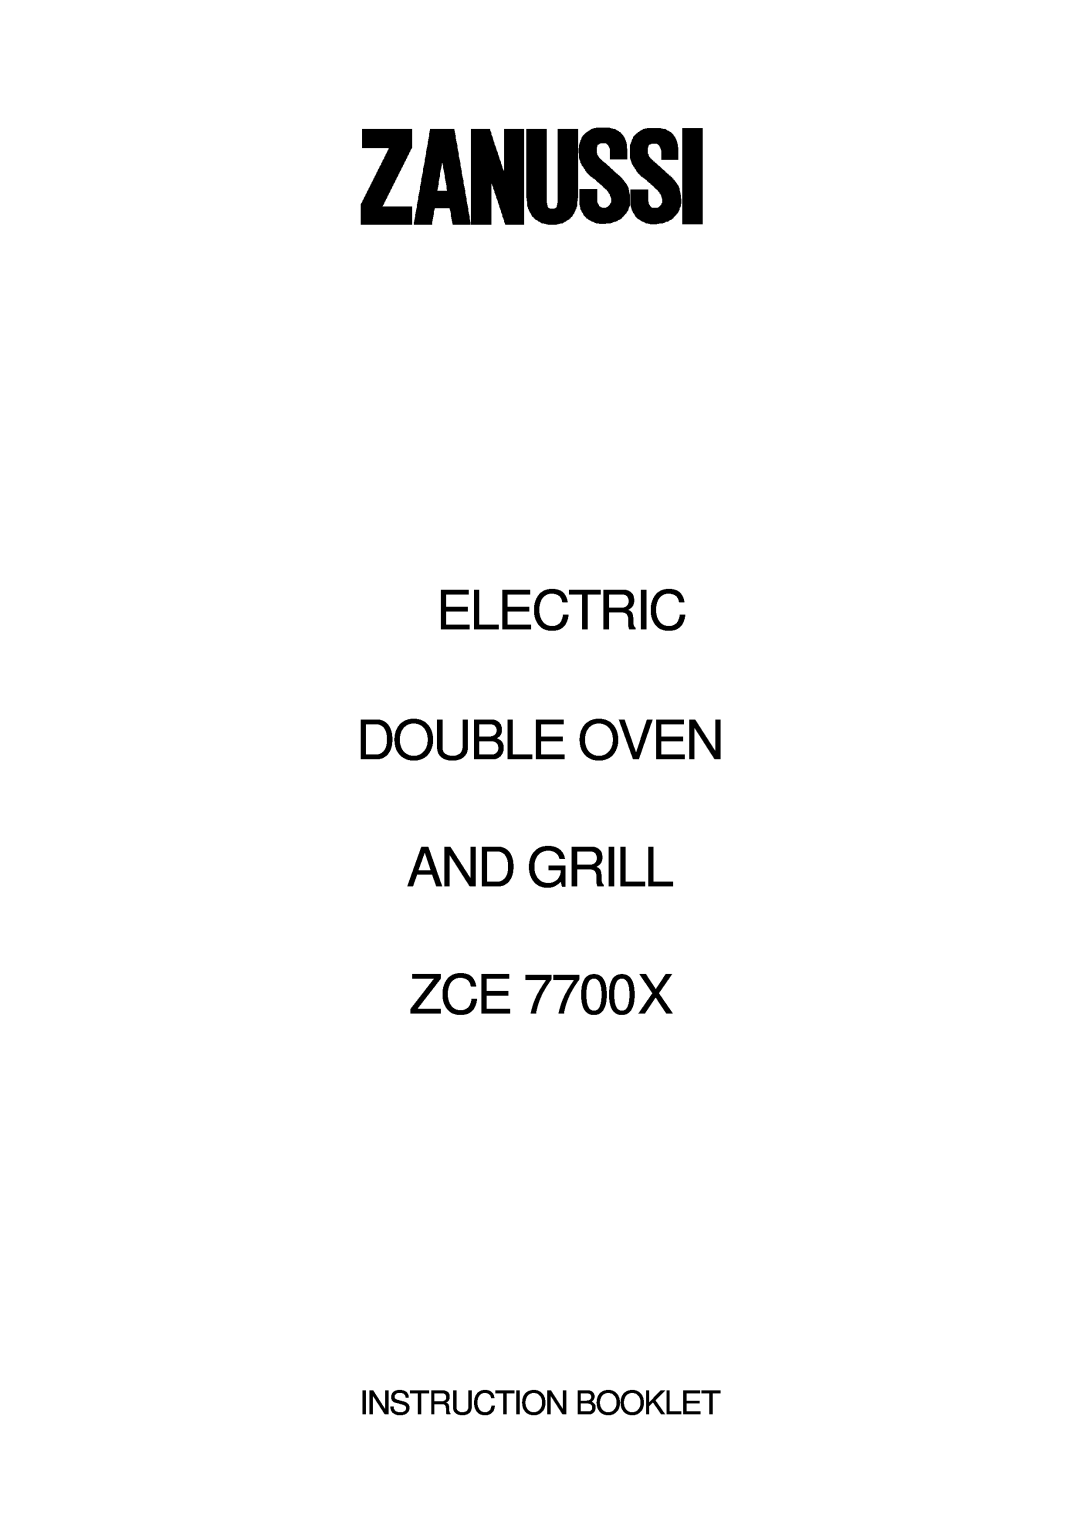 Zanussi ZCE 7700X manual Electric Double Oven And Grill Zce, Instruction Booklet 